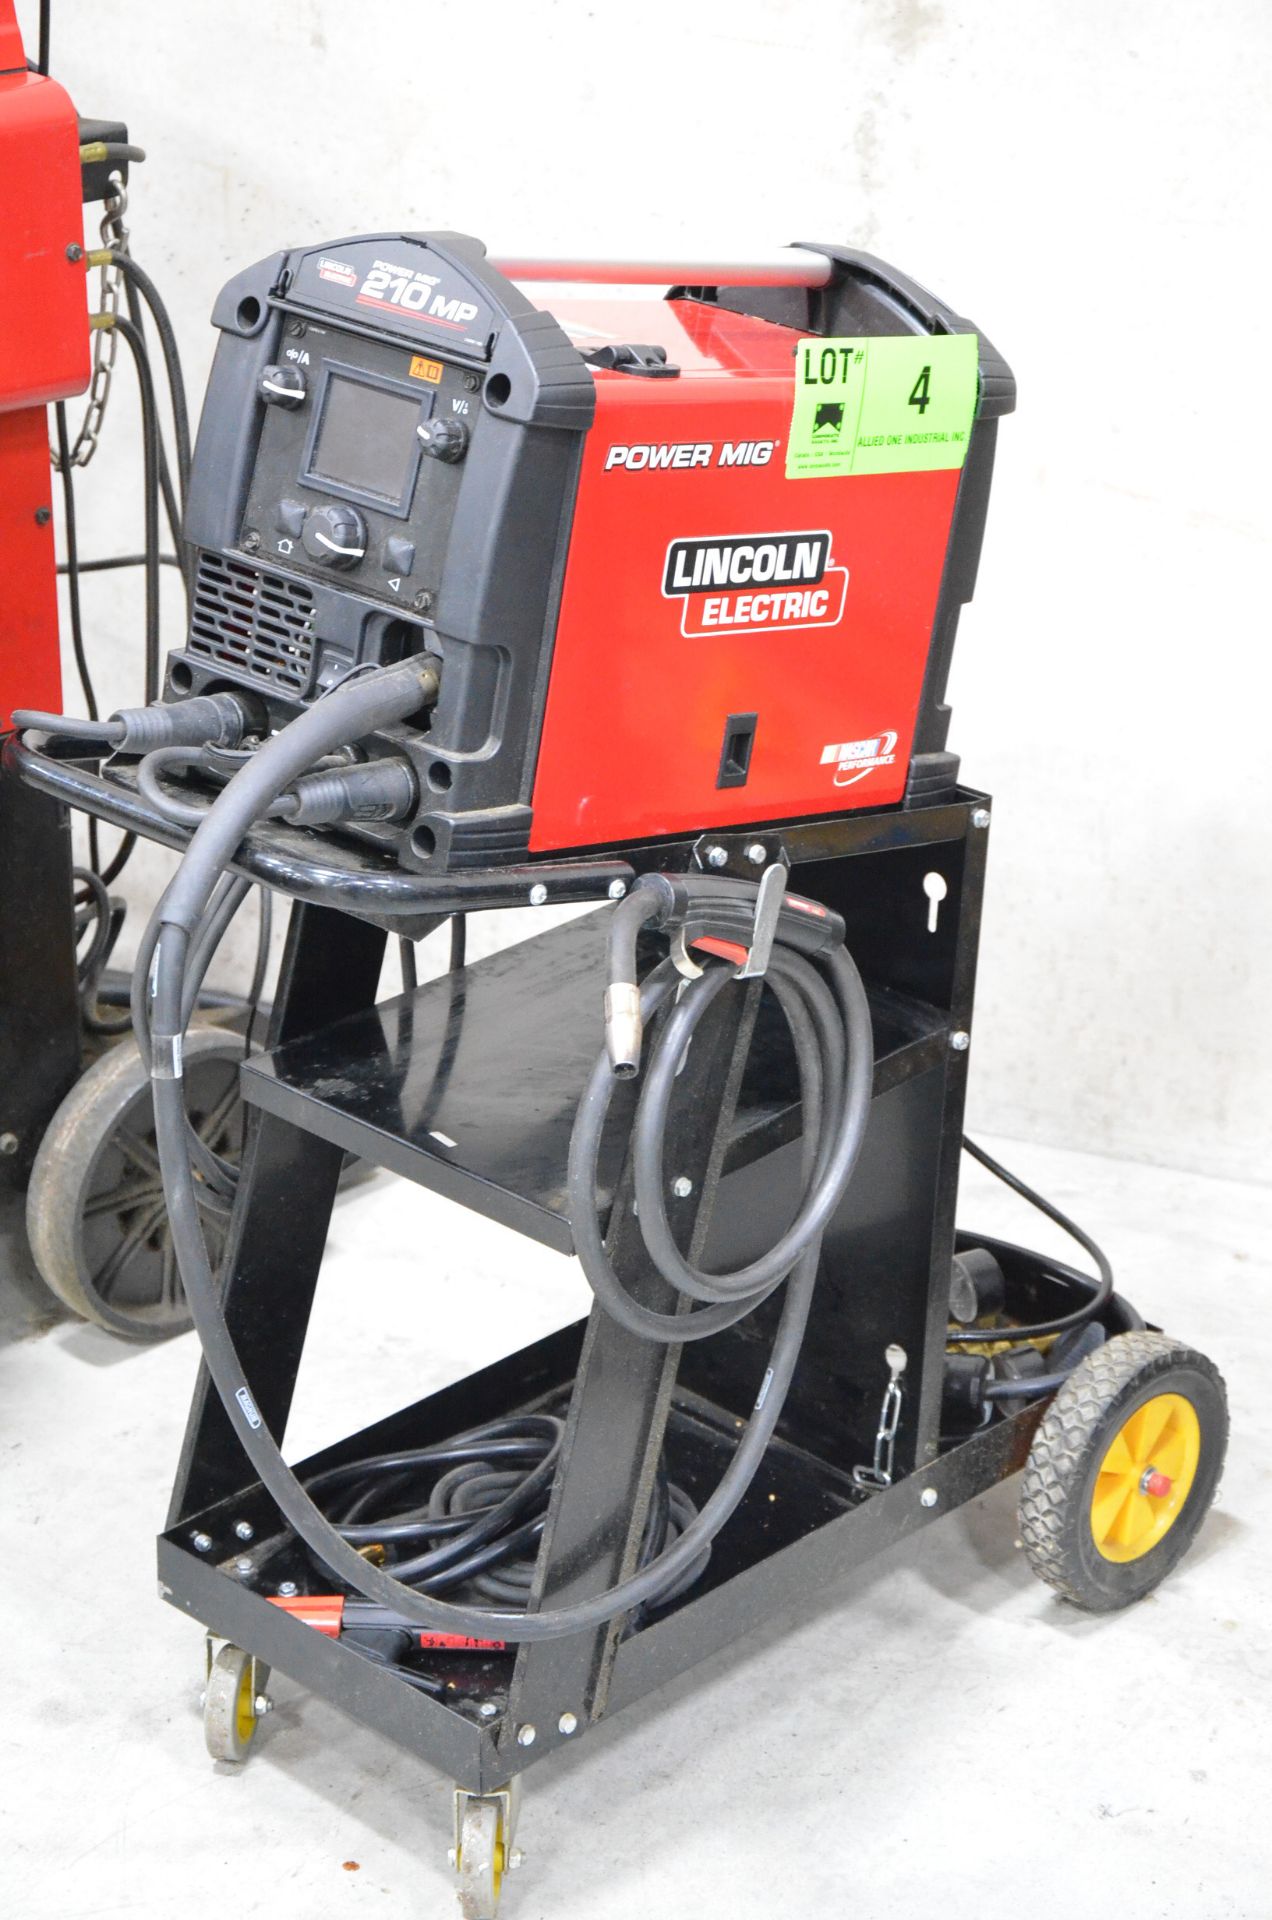 LINCOLN ELECTRIC POWER MIG 210 MP DIGITAL PORTABLE MIG ARC WELDER WITH CABLES AND GUN, S/N